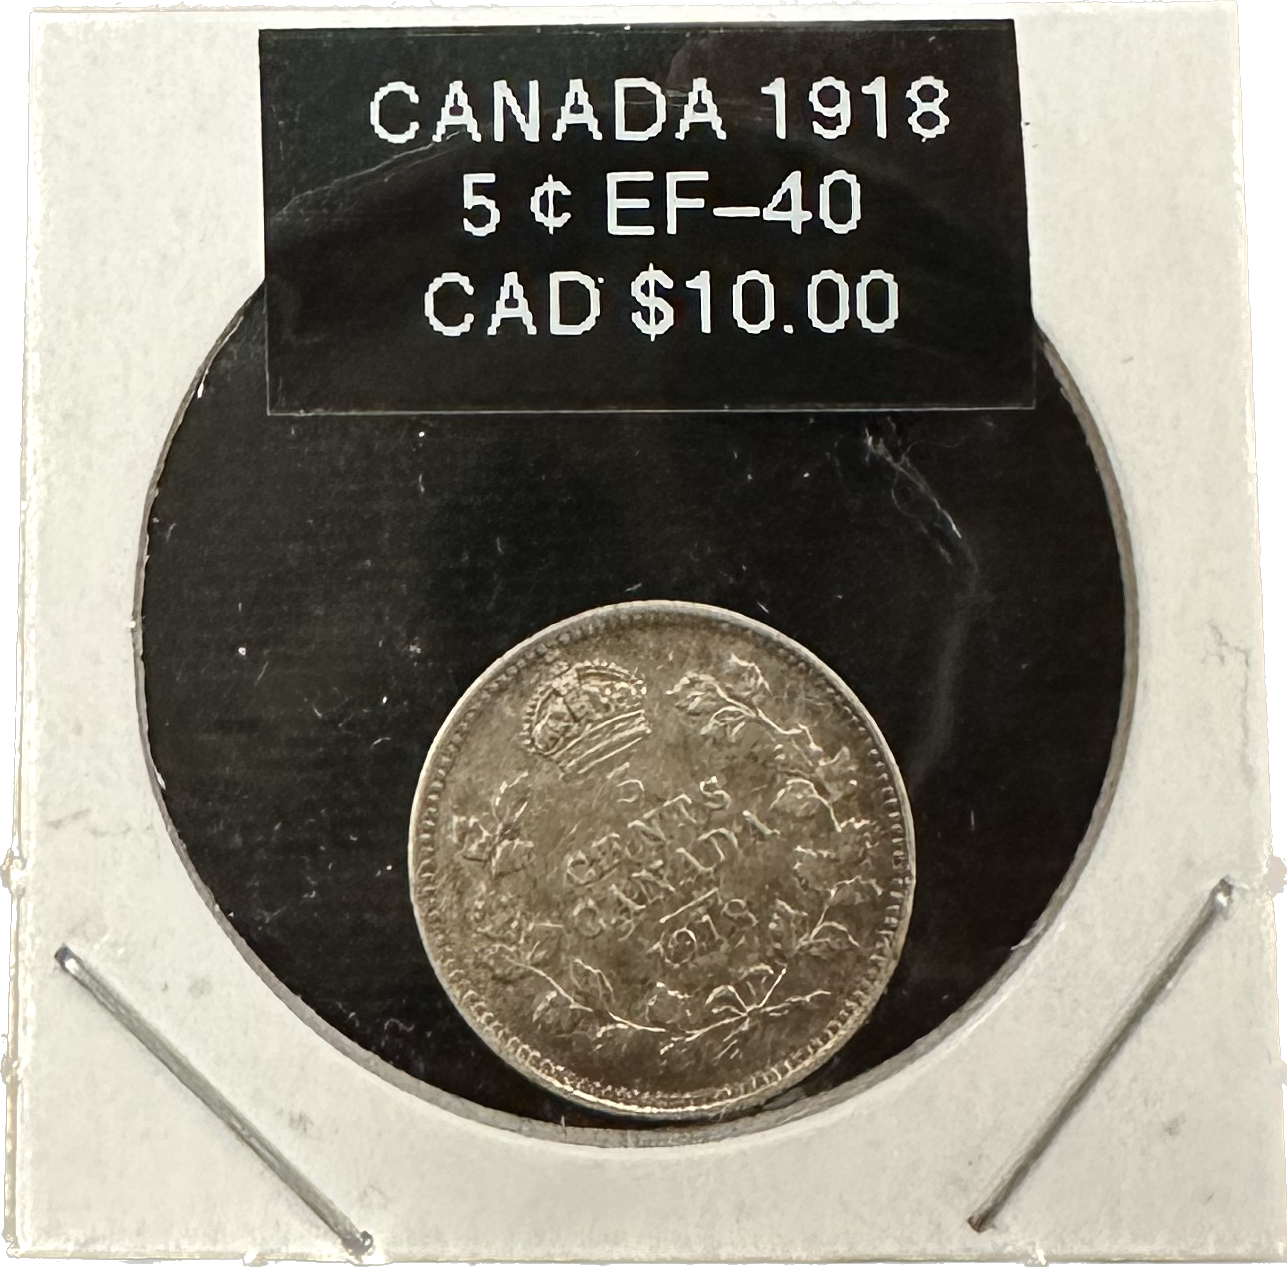 Canada 5 Cents 1918 EF-40 Coin